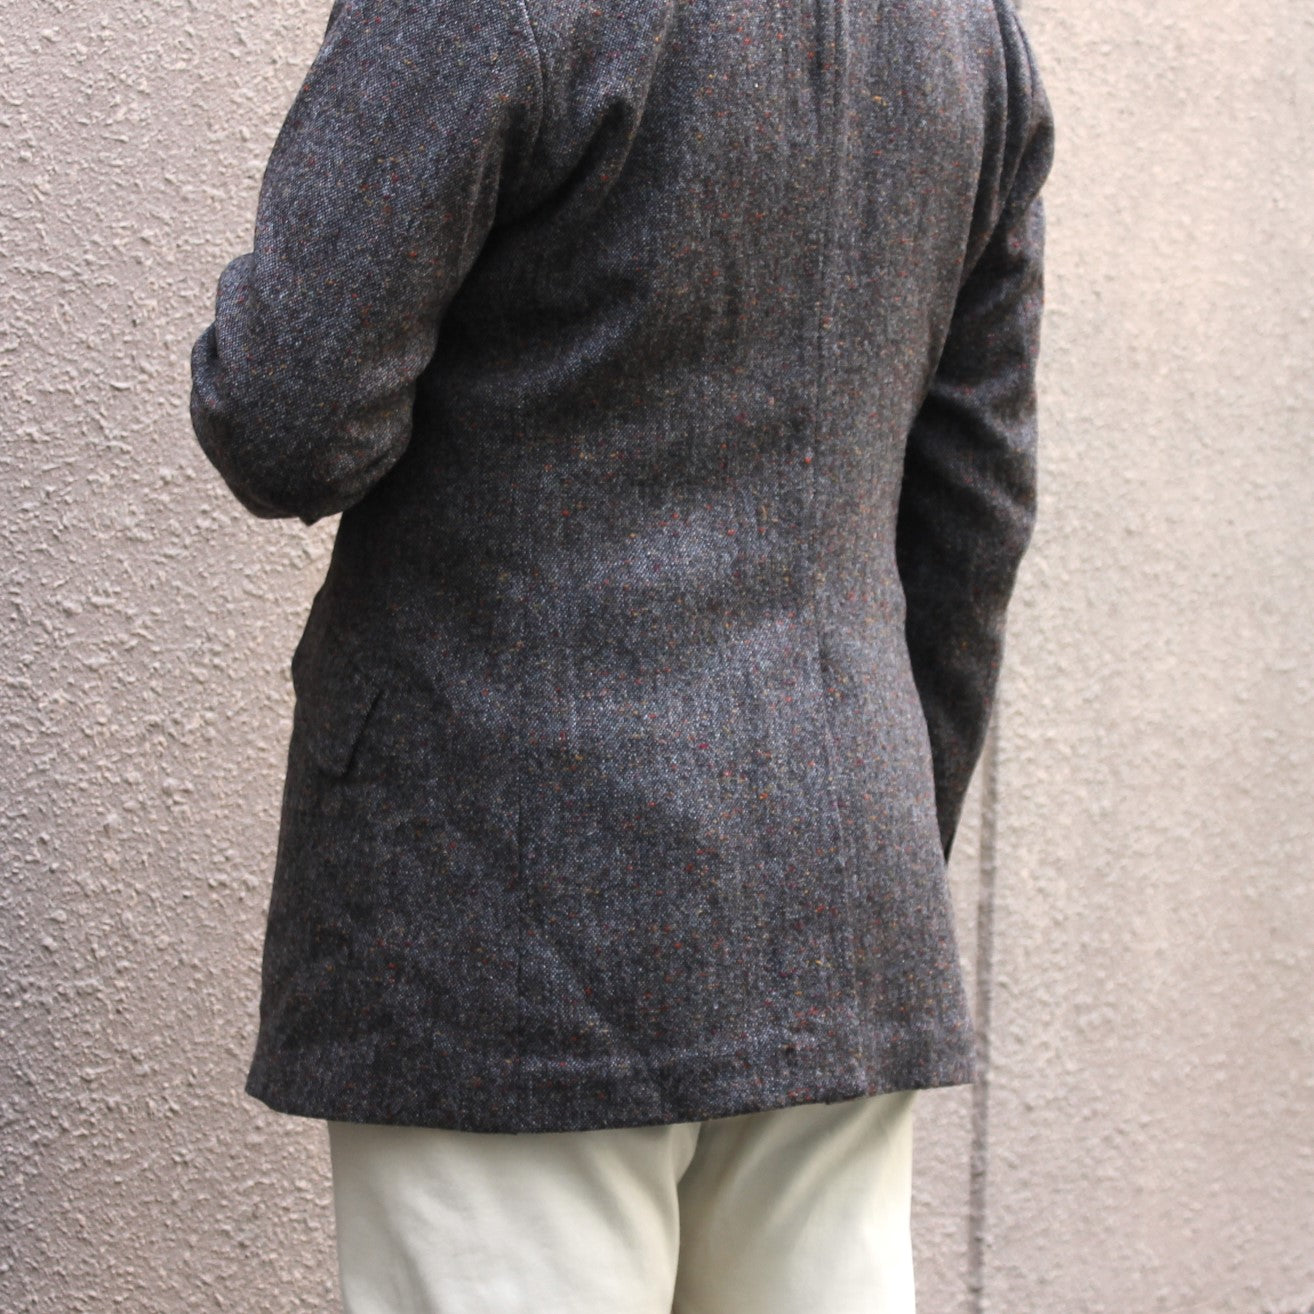 Mage charly Donegal Tweed